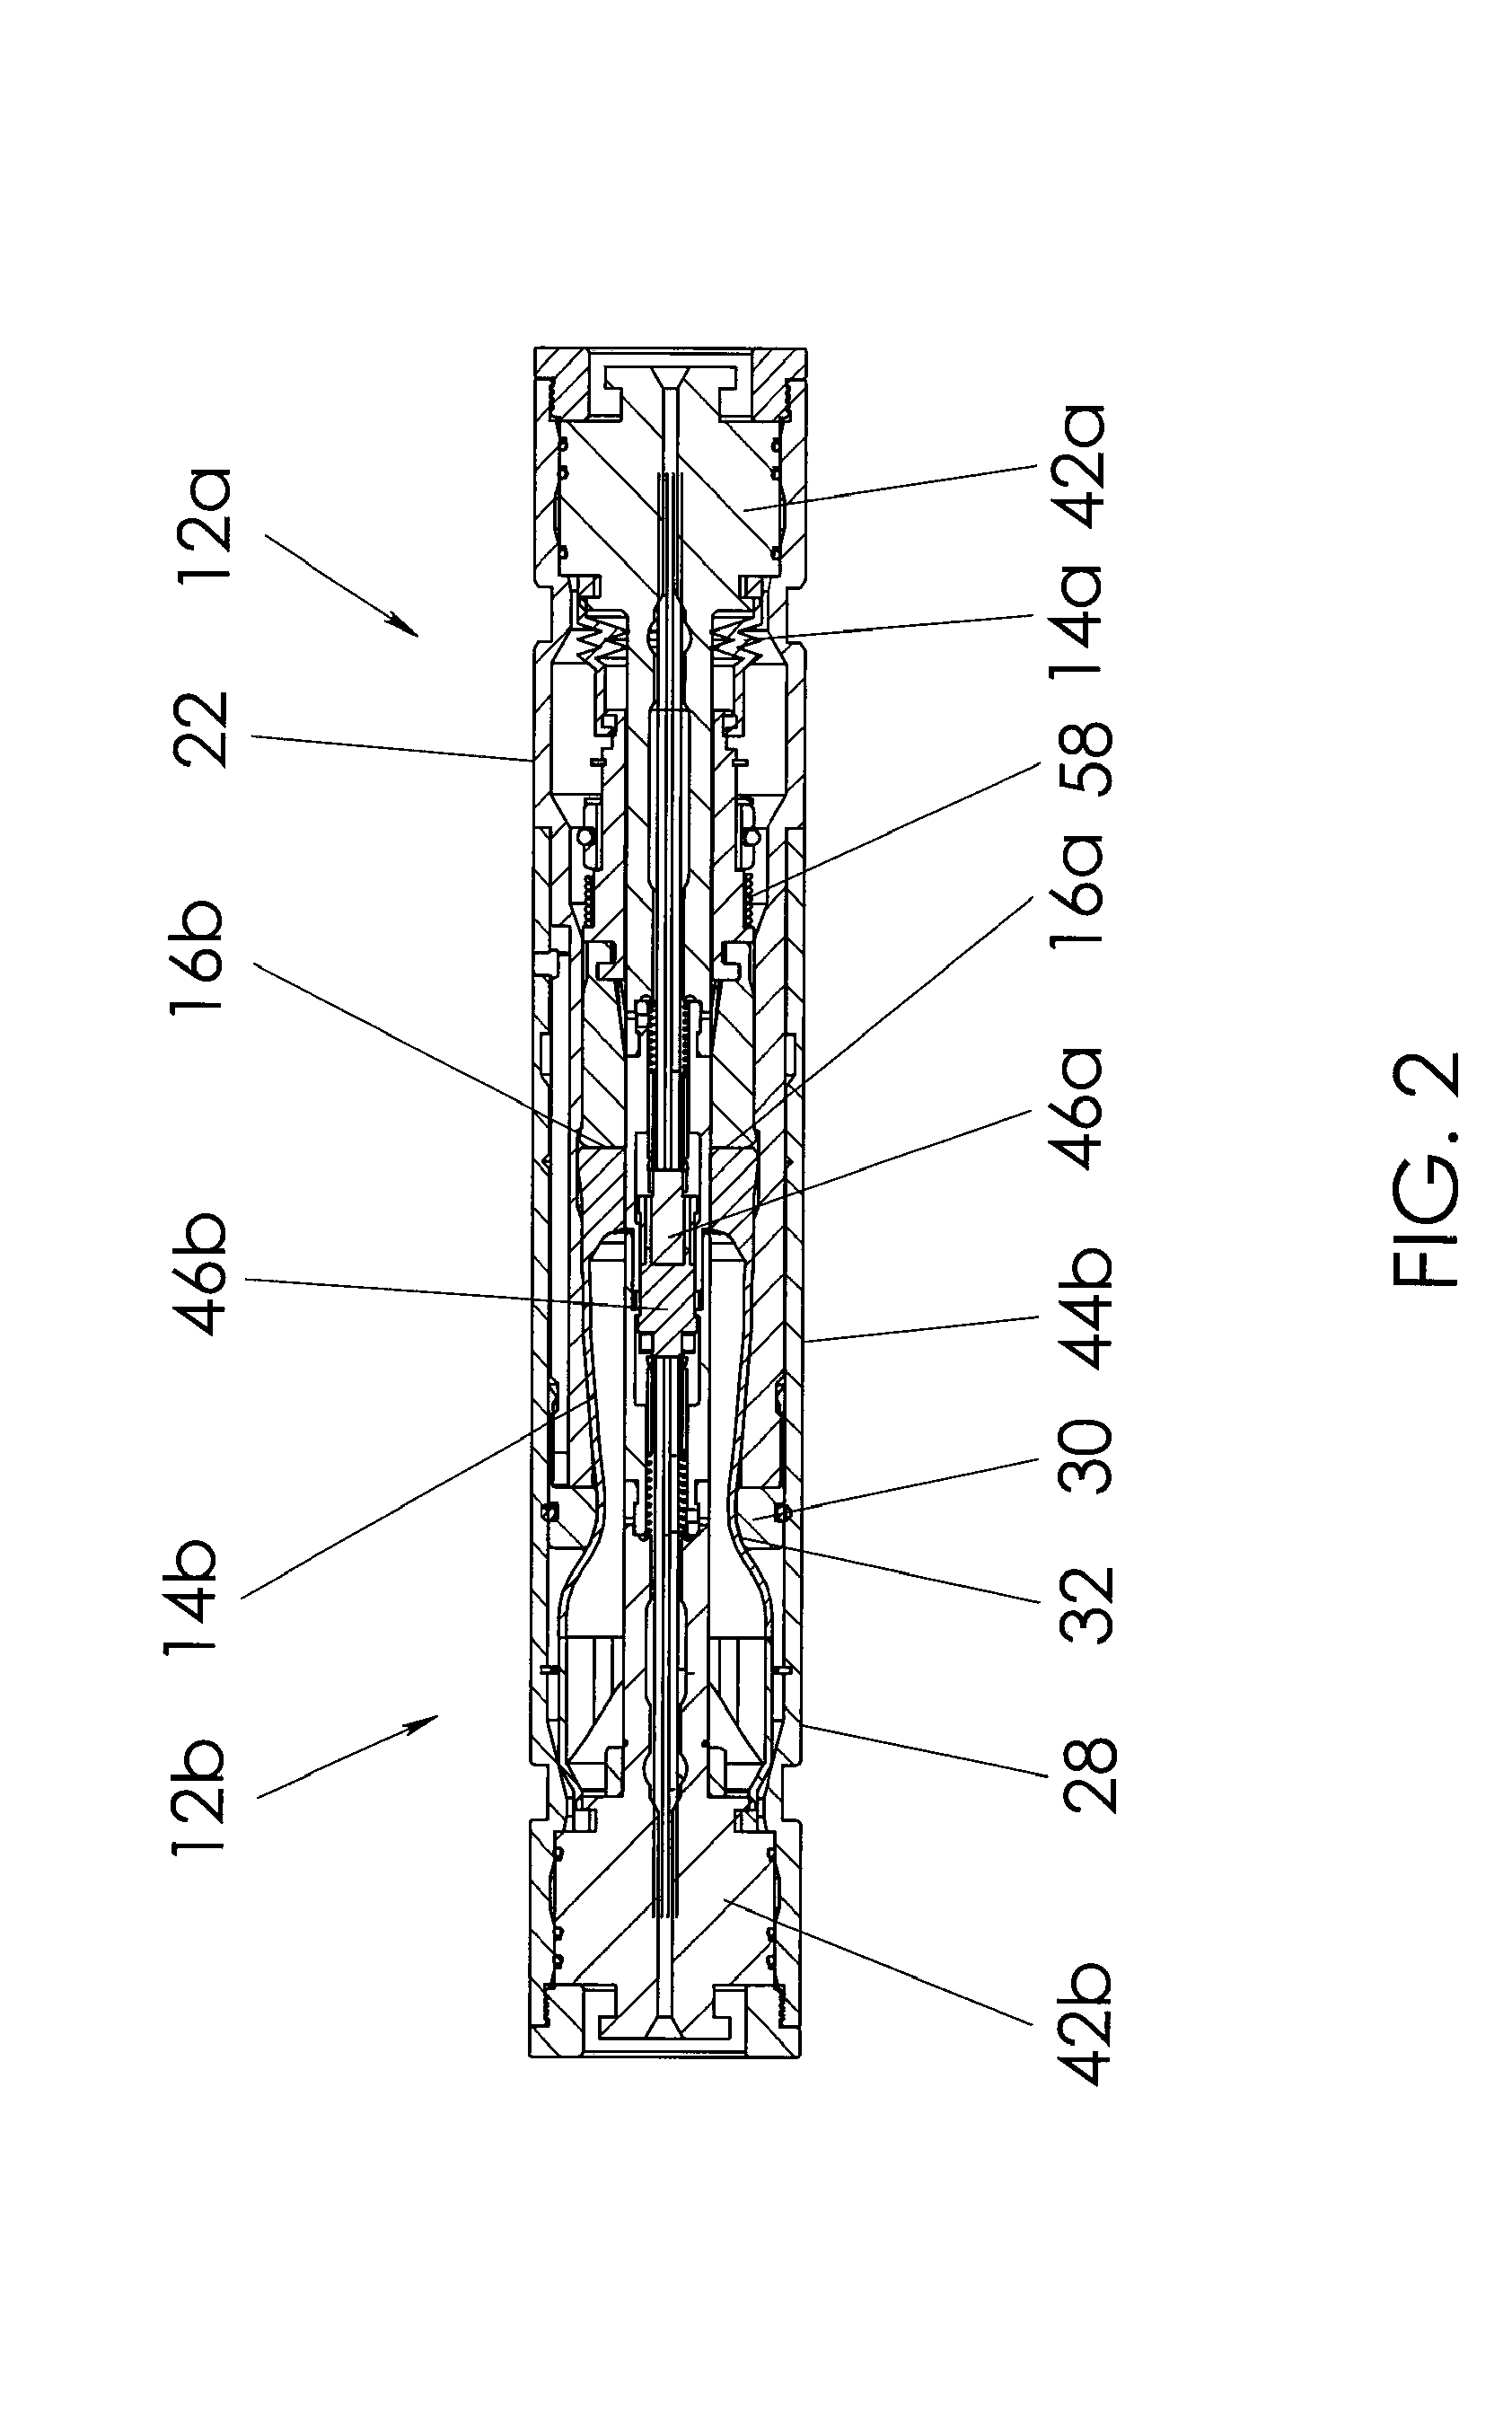 Connector including interlocking assembly and associated methods